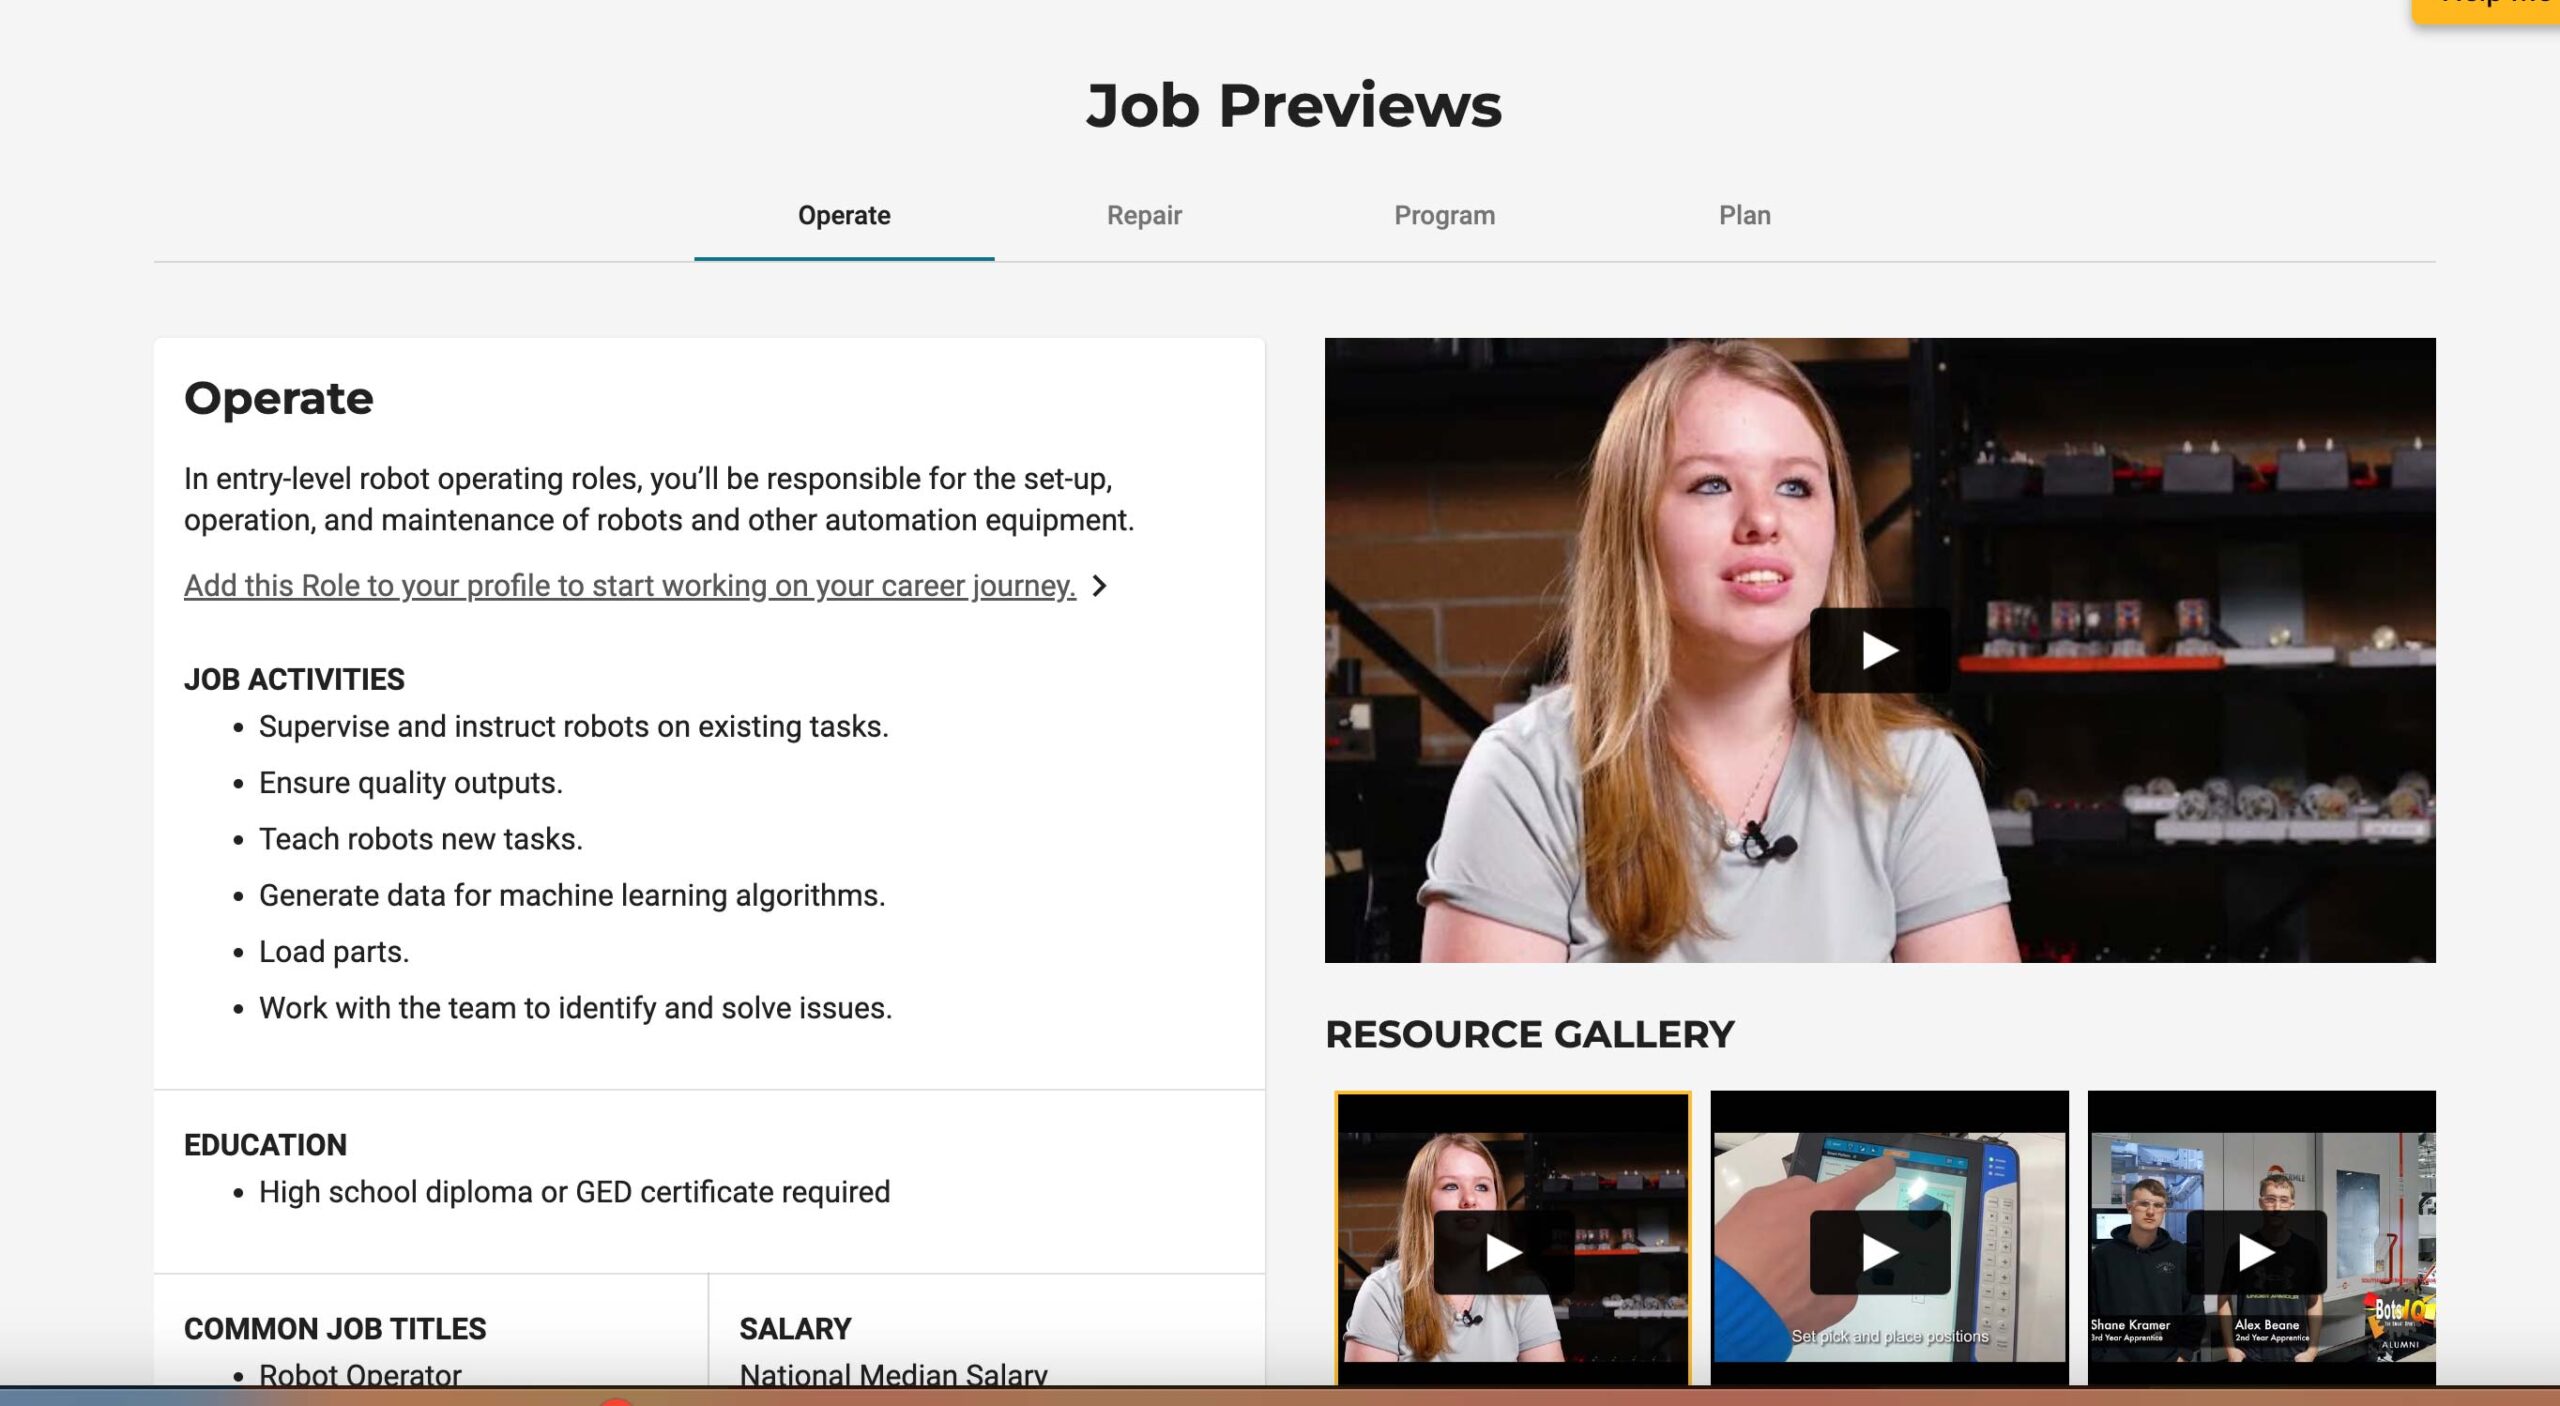 A screengrab showing the recent RoboticsCareer.org release. The image shows image and text talking about robotics careers in manufacturing